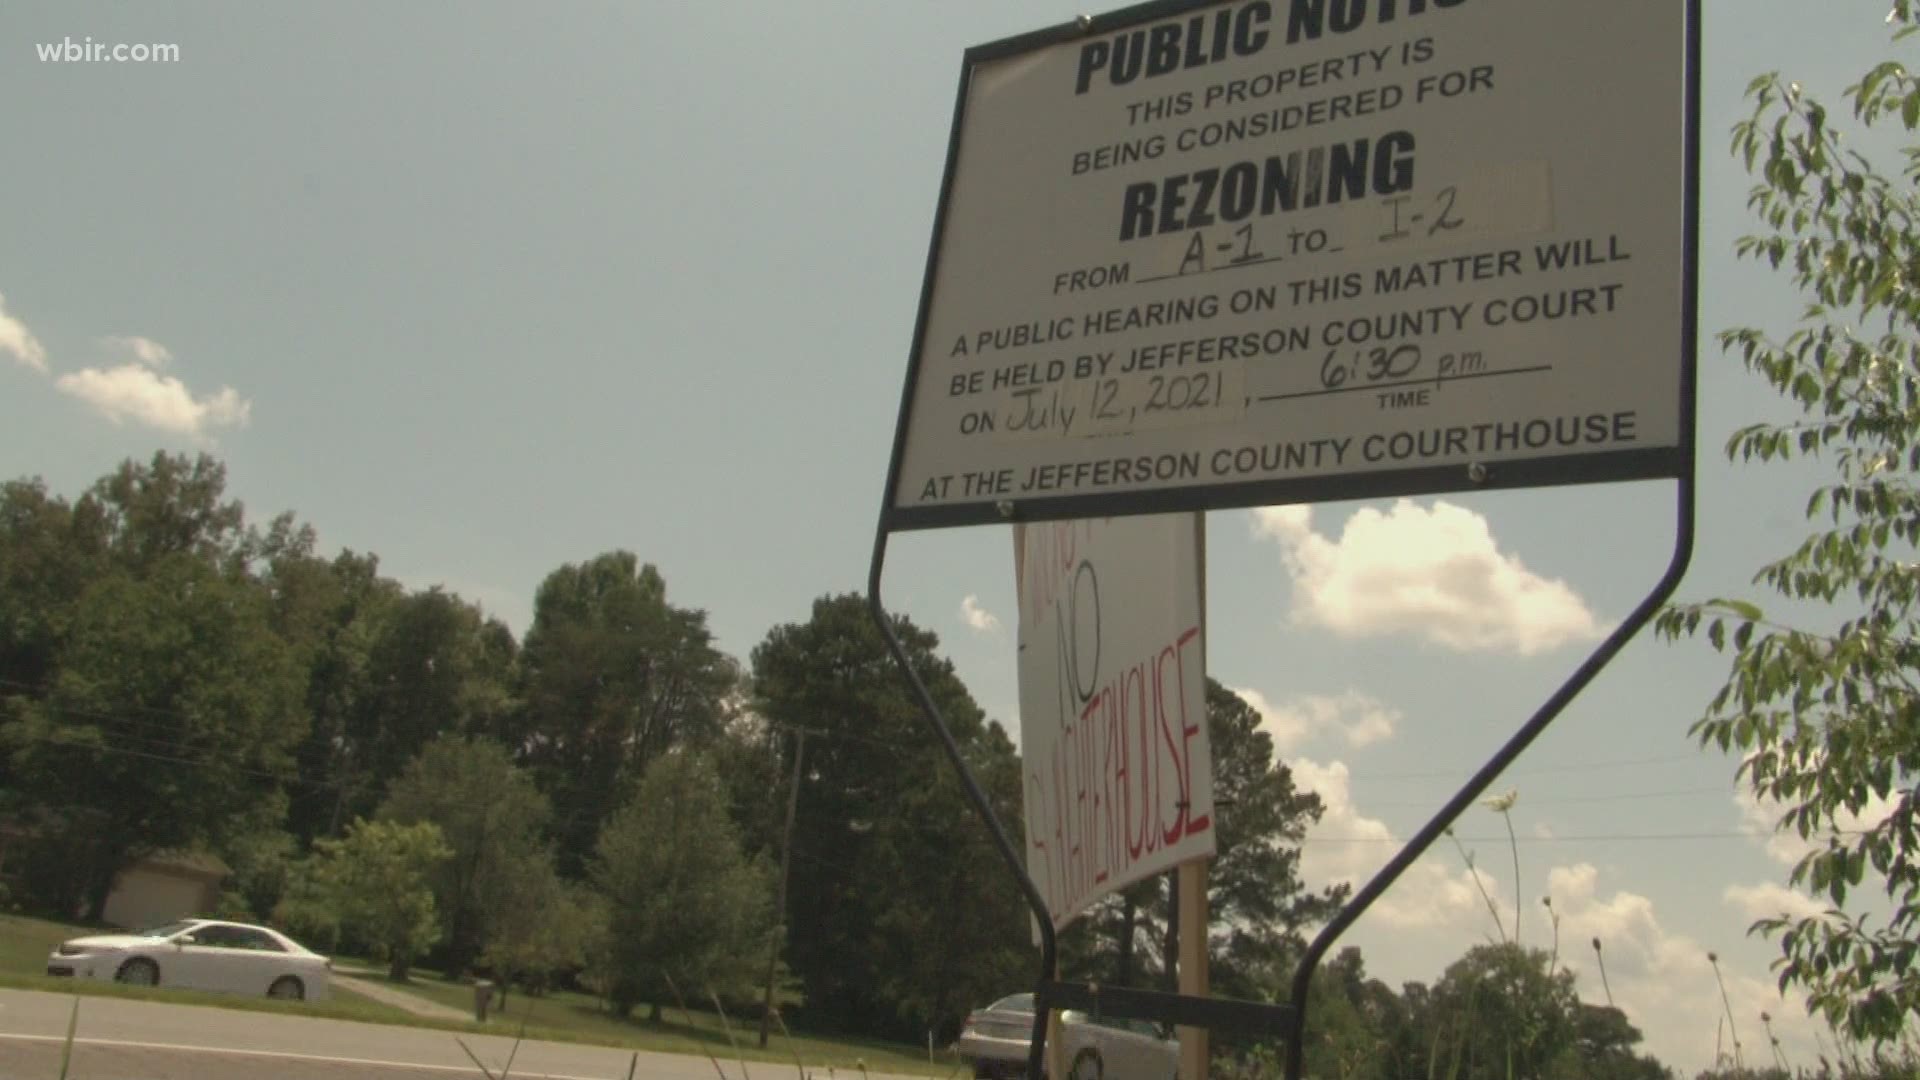 A request to rezone land in Jefferson County for a possible slaughterhouse is creating concerns  among some neighbors.